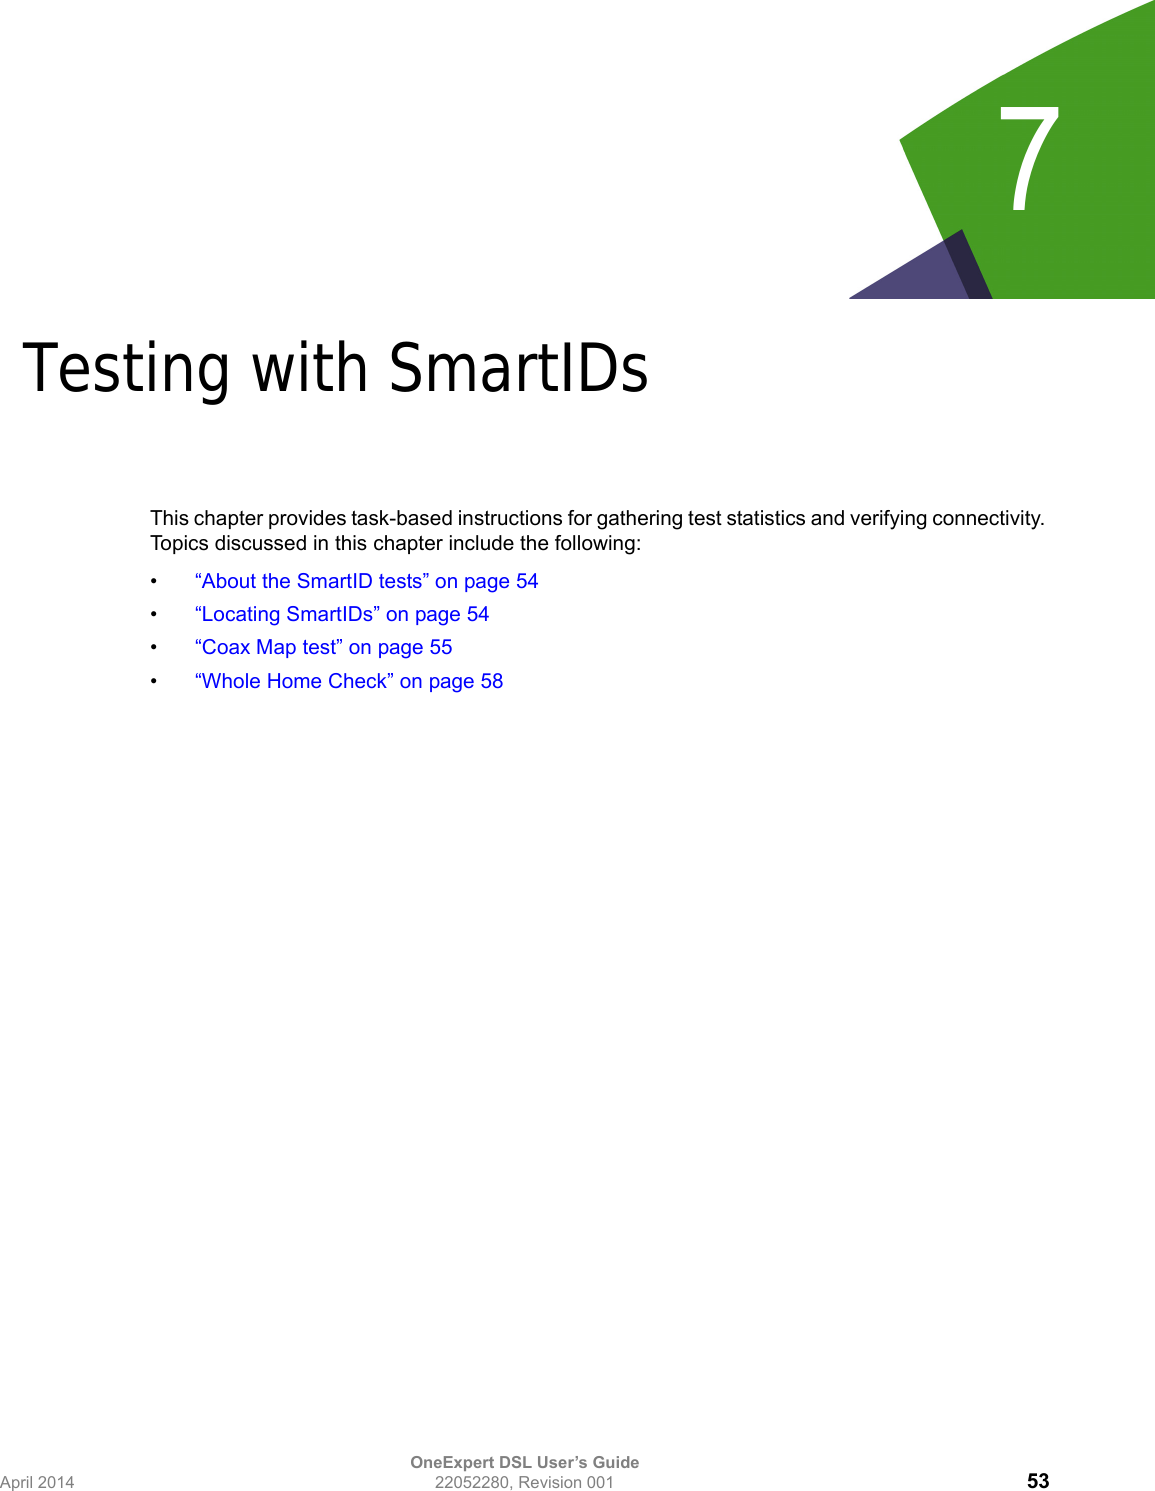 OneExpert DSL User’s GuideApril 2014 22052280, Revision 001 537Chapter 7Testing with SmartIDsThis chapter provides task-based instructions for gathering test statistics and verifying connectivity. Topics discussed in this chapter include the following:•“About the SmartID tests” on page 54•“Locating SmartIDs” on page 54•“Coax Map test” on page 55•“Whole Home Check” on page 58